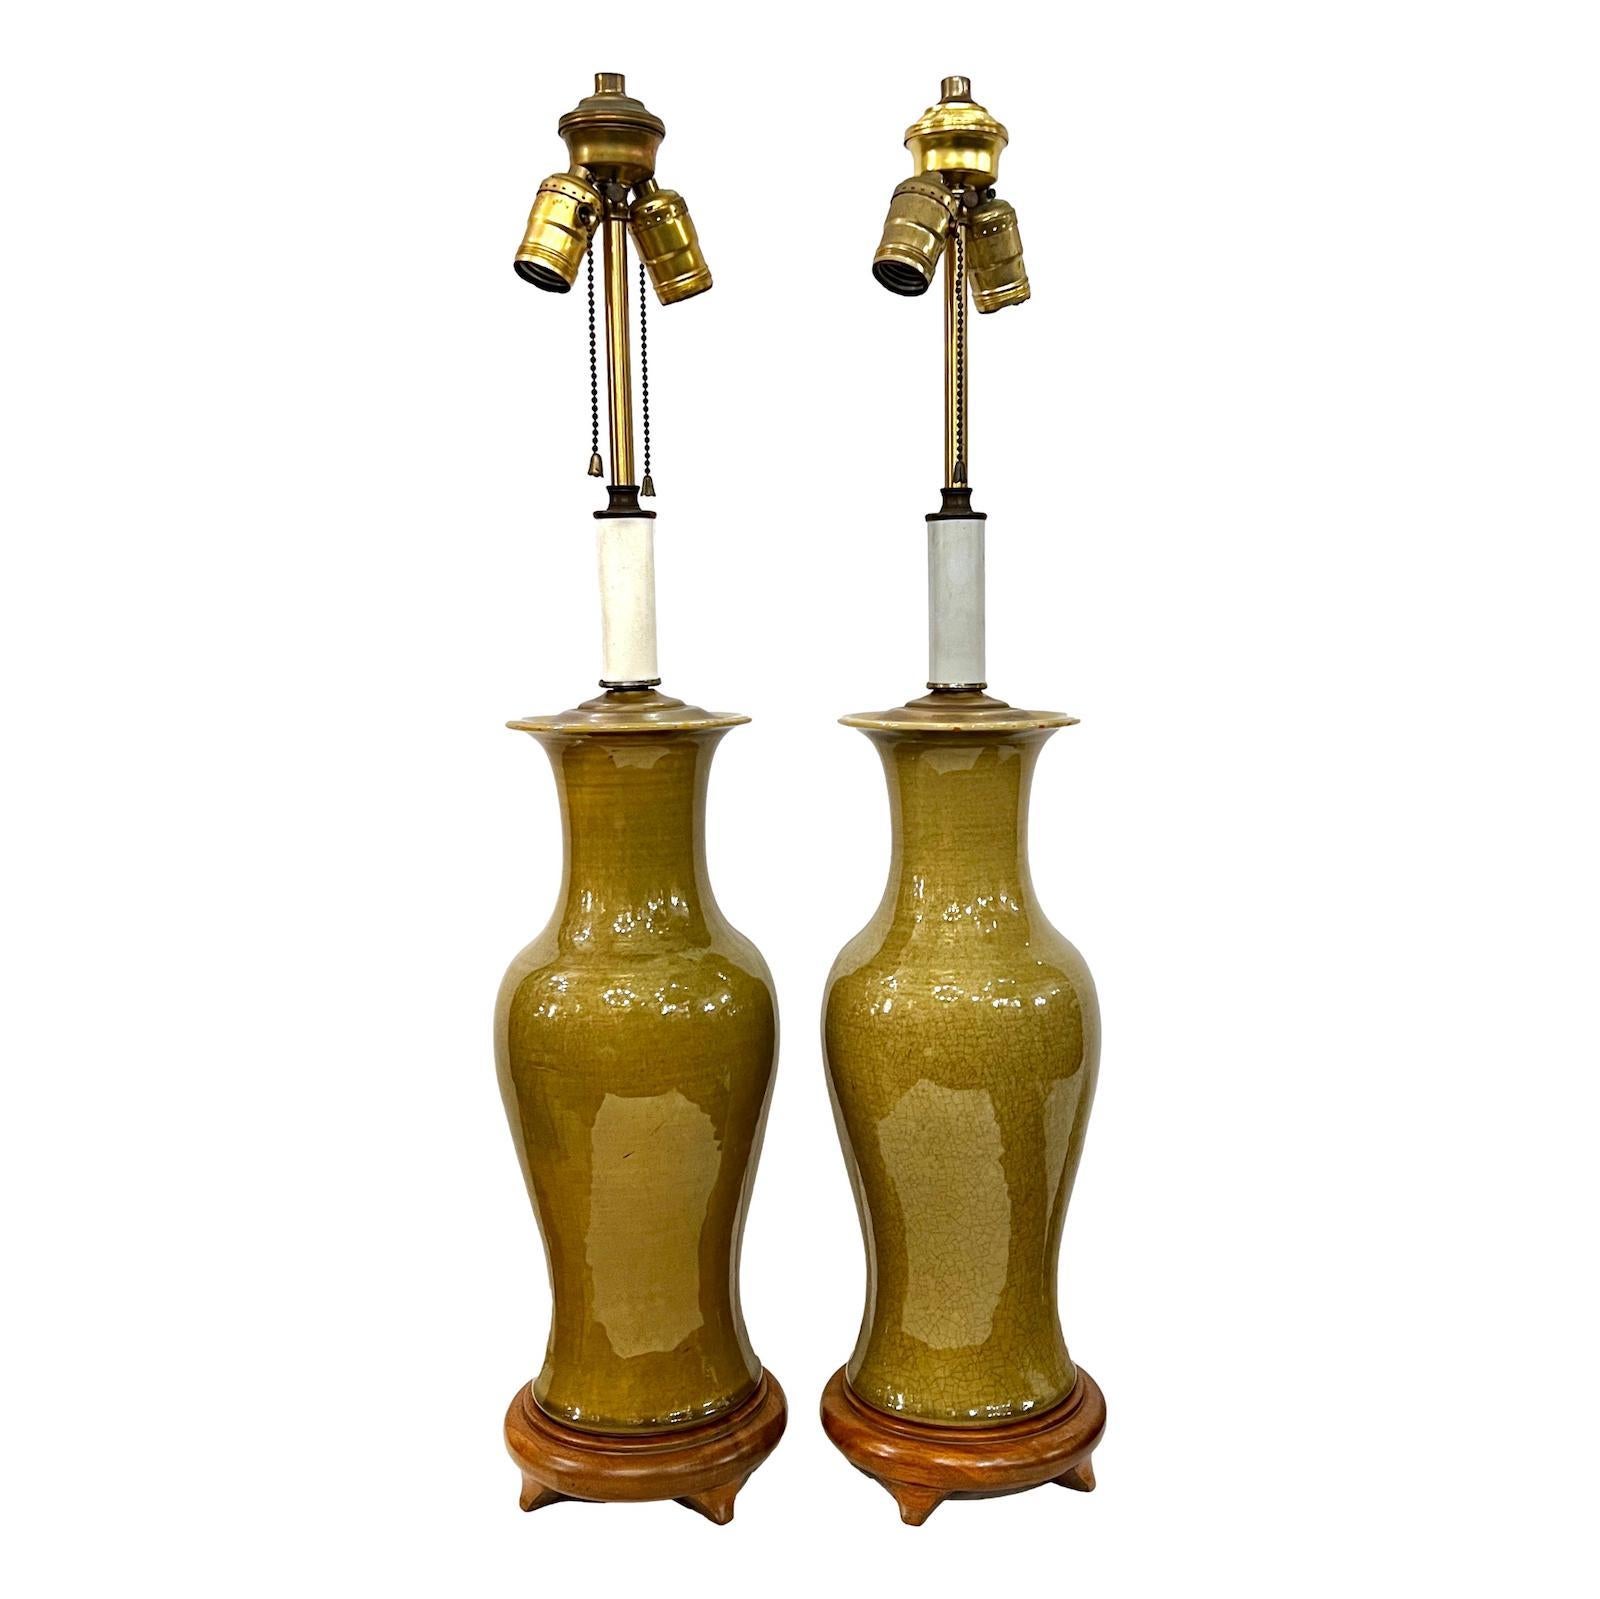 Pair of circa 1940s French celadon tone porcelain lamps with crackled finish and wood bases.

Measurements
Height of Body: 18